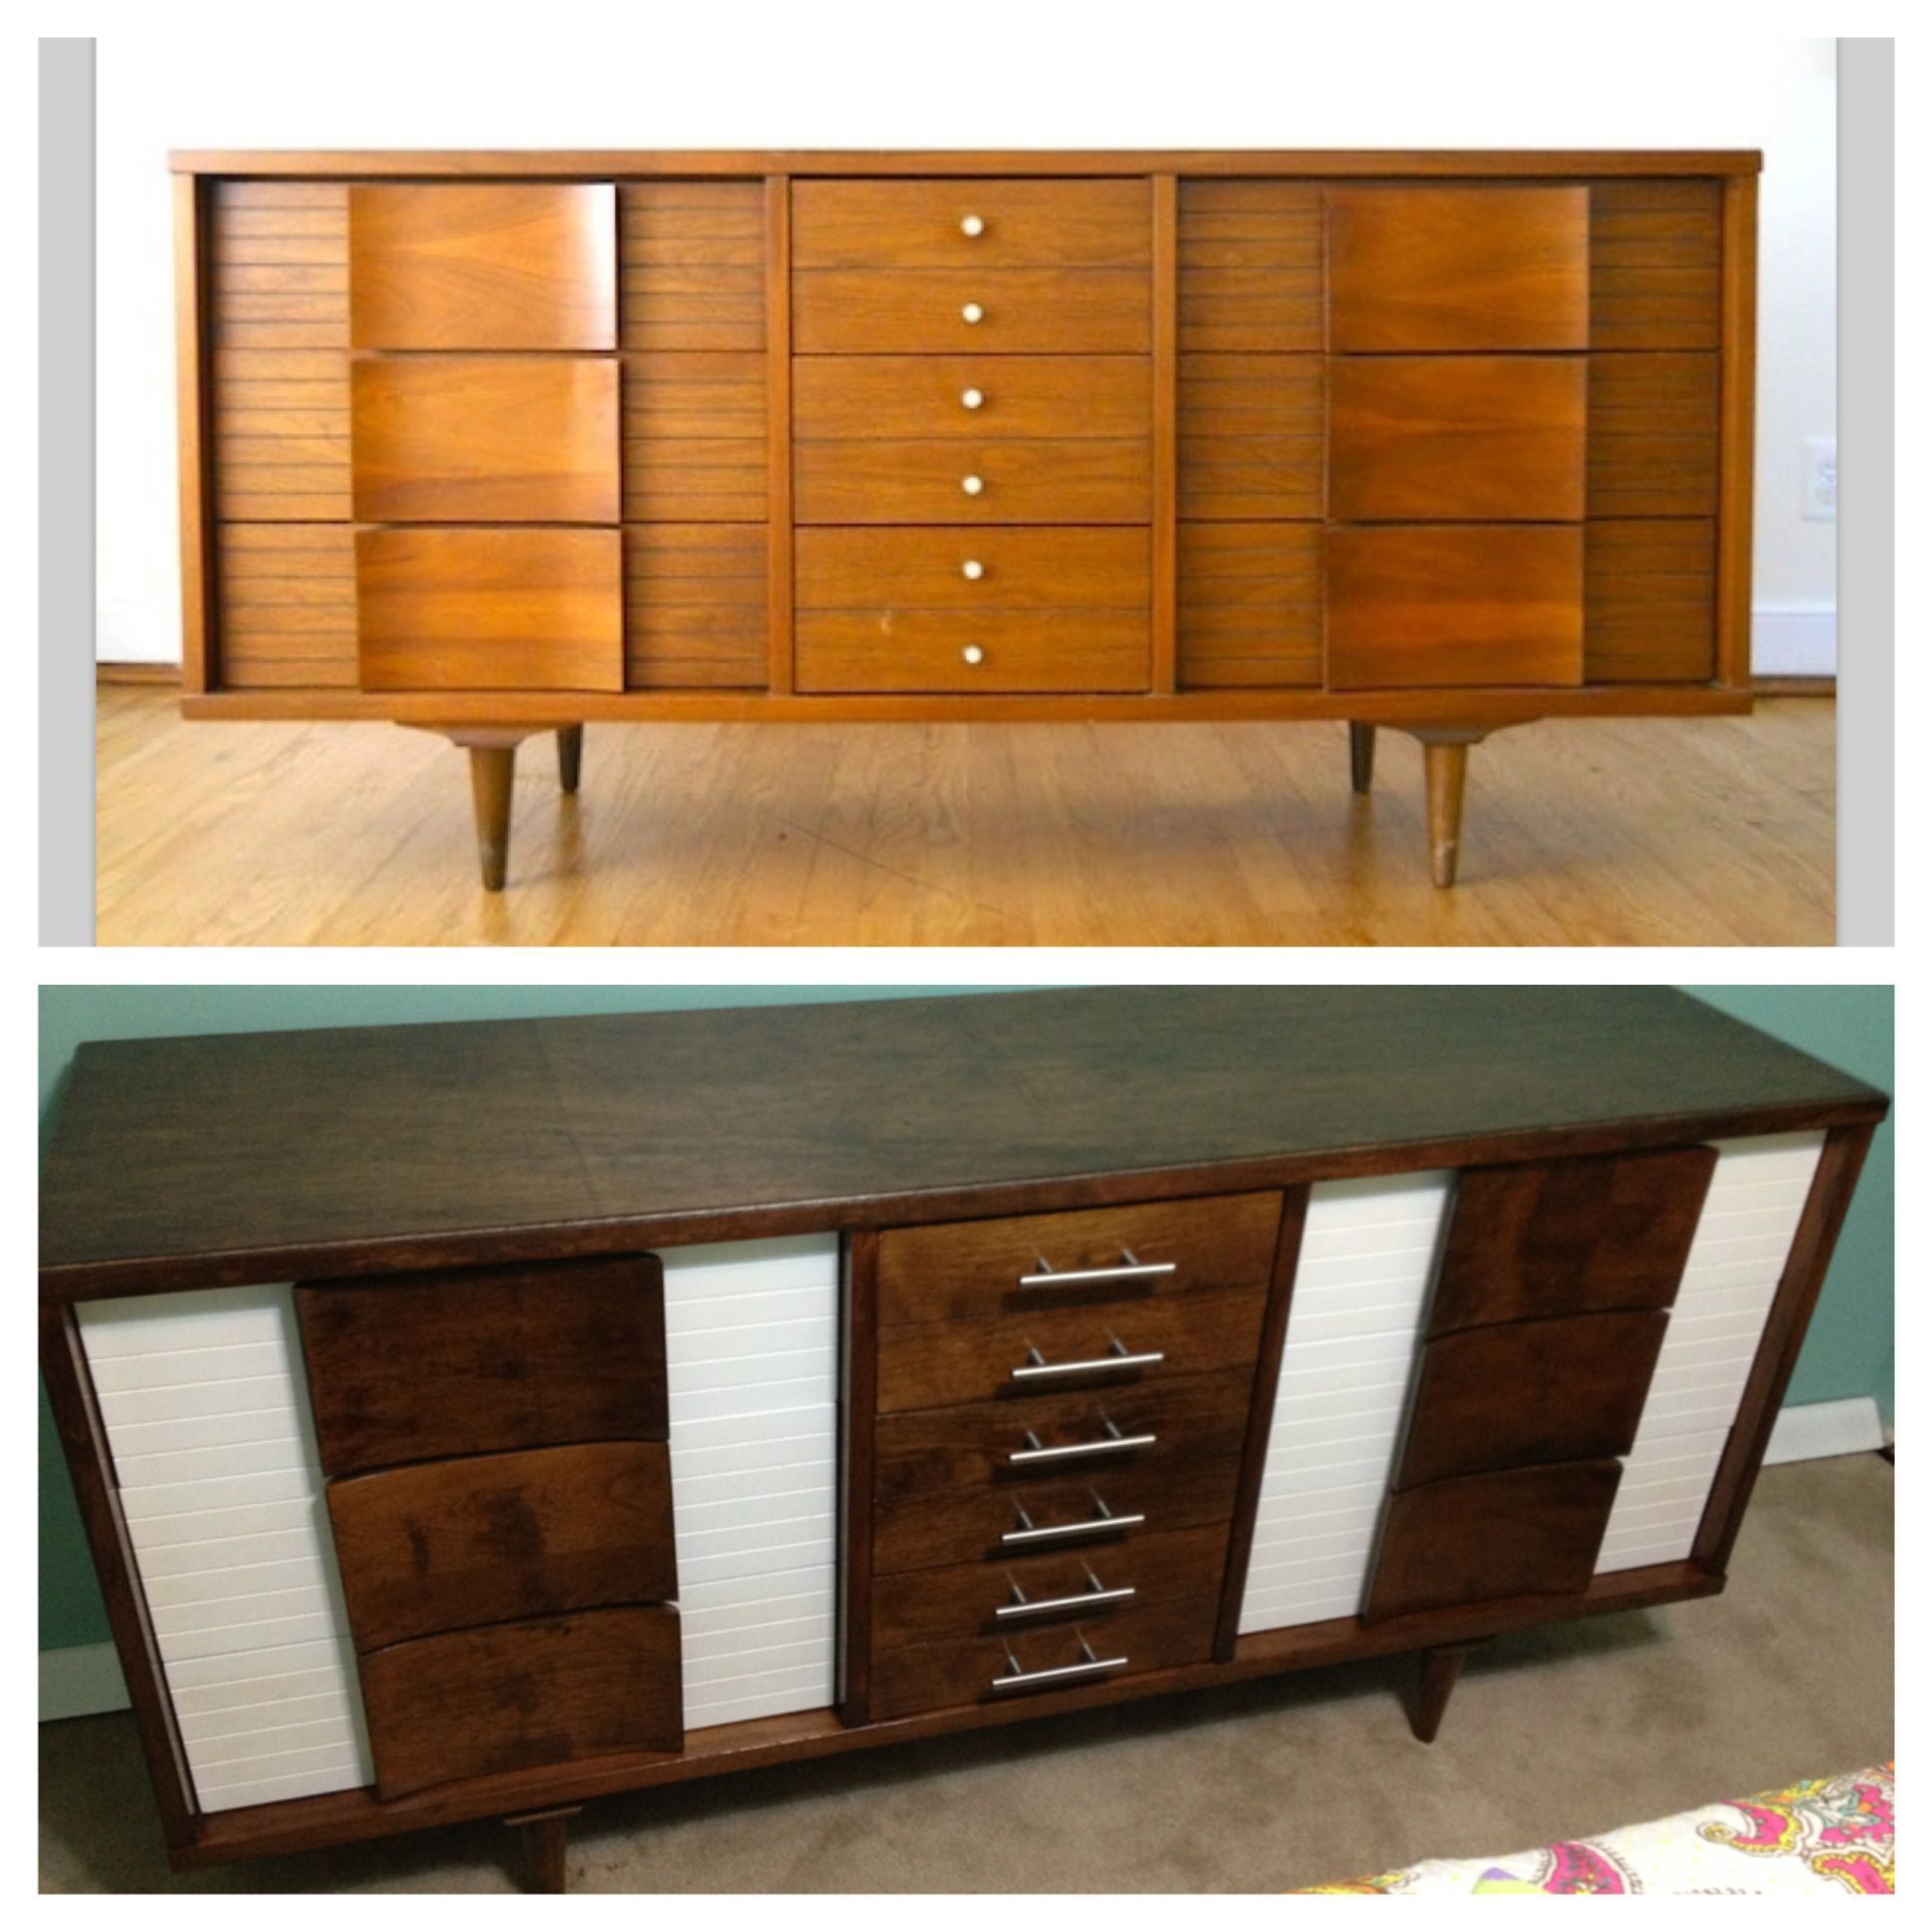 Before And After Johnson Carper Furniture | Diy | Furniture In Filkins Sideboards (View 17 of 20)